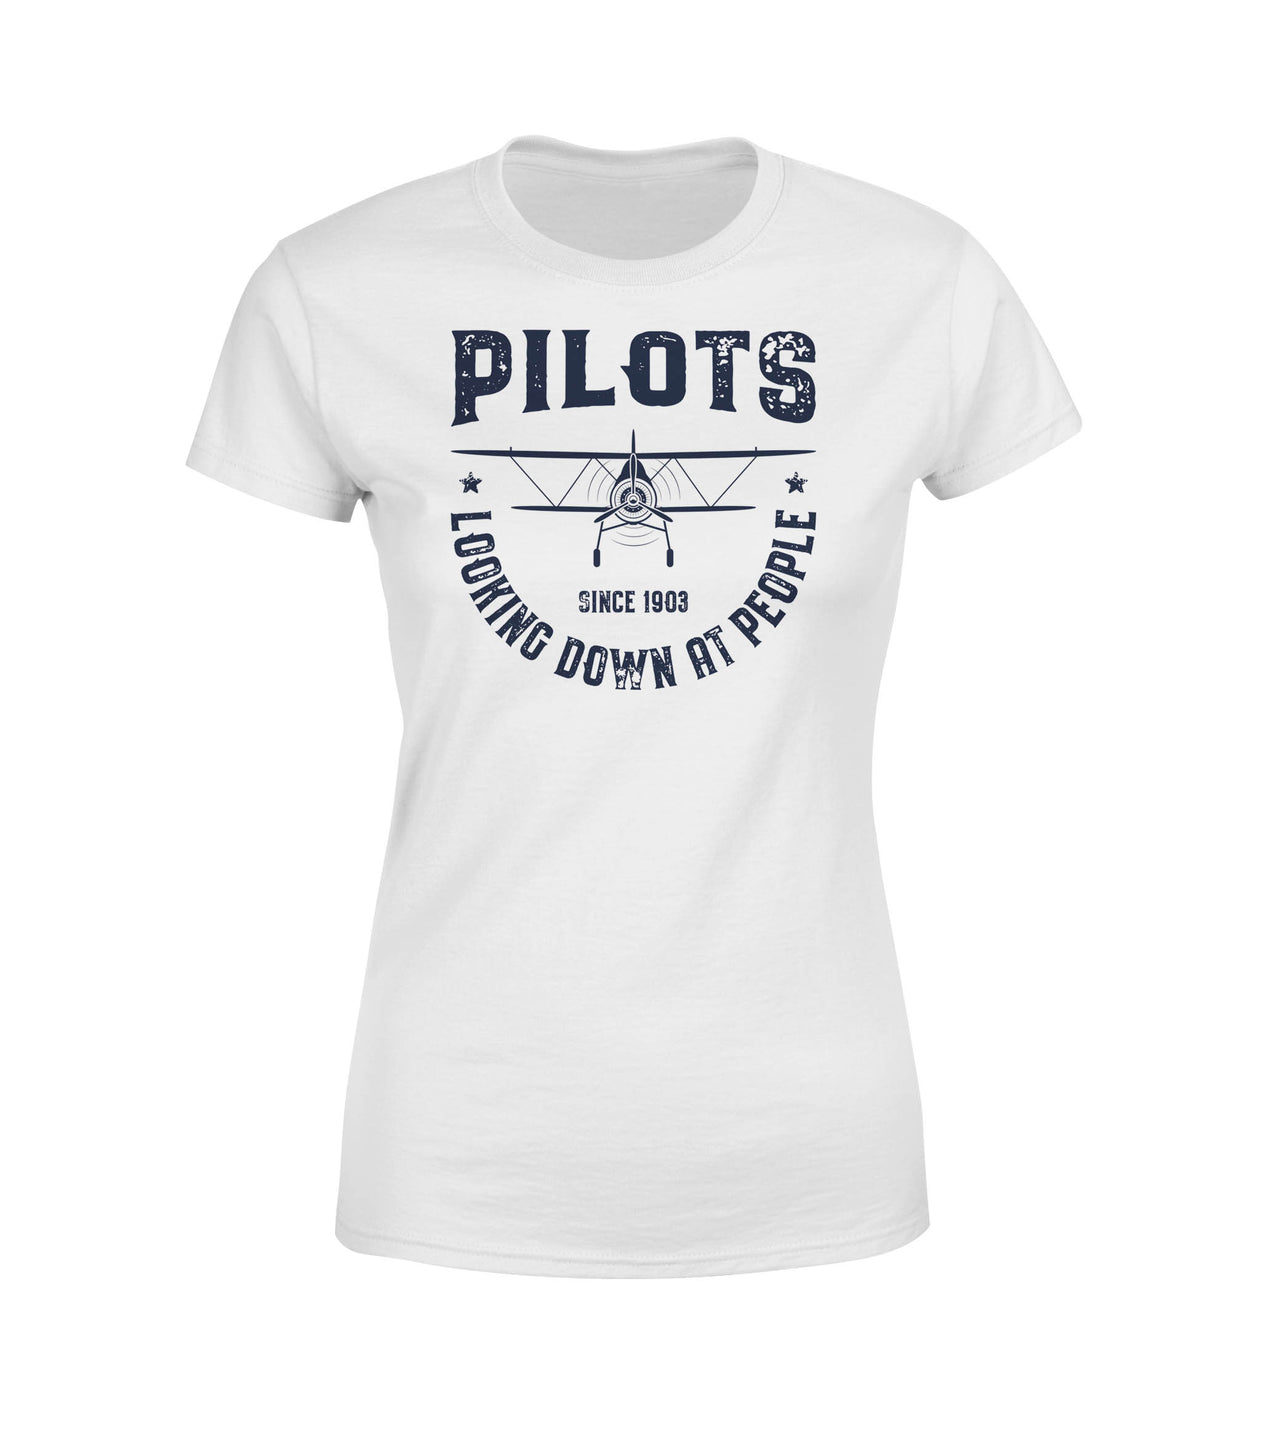 Pilots Looking Down at People Since 1903 Designed Women T-Shirts